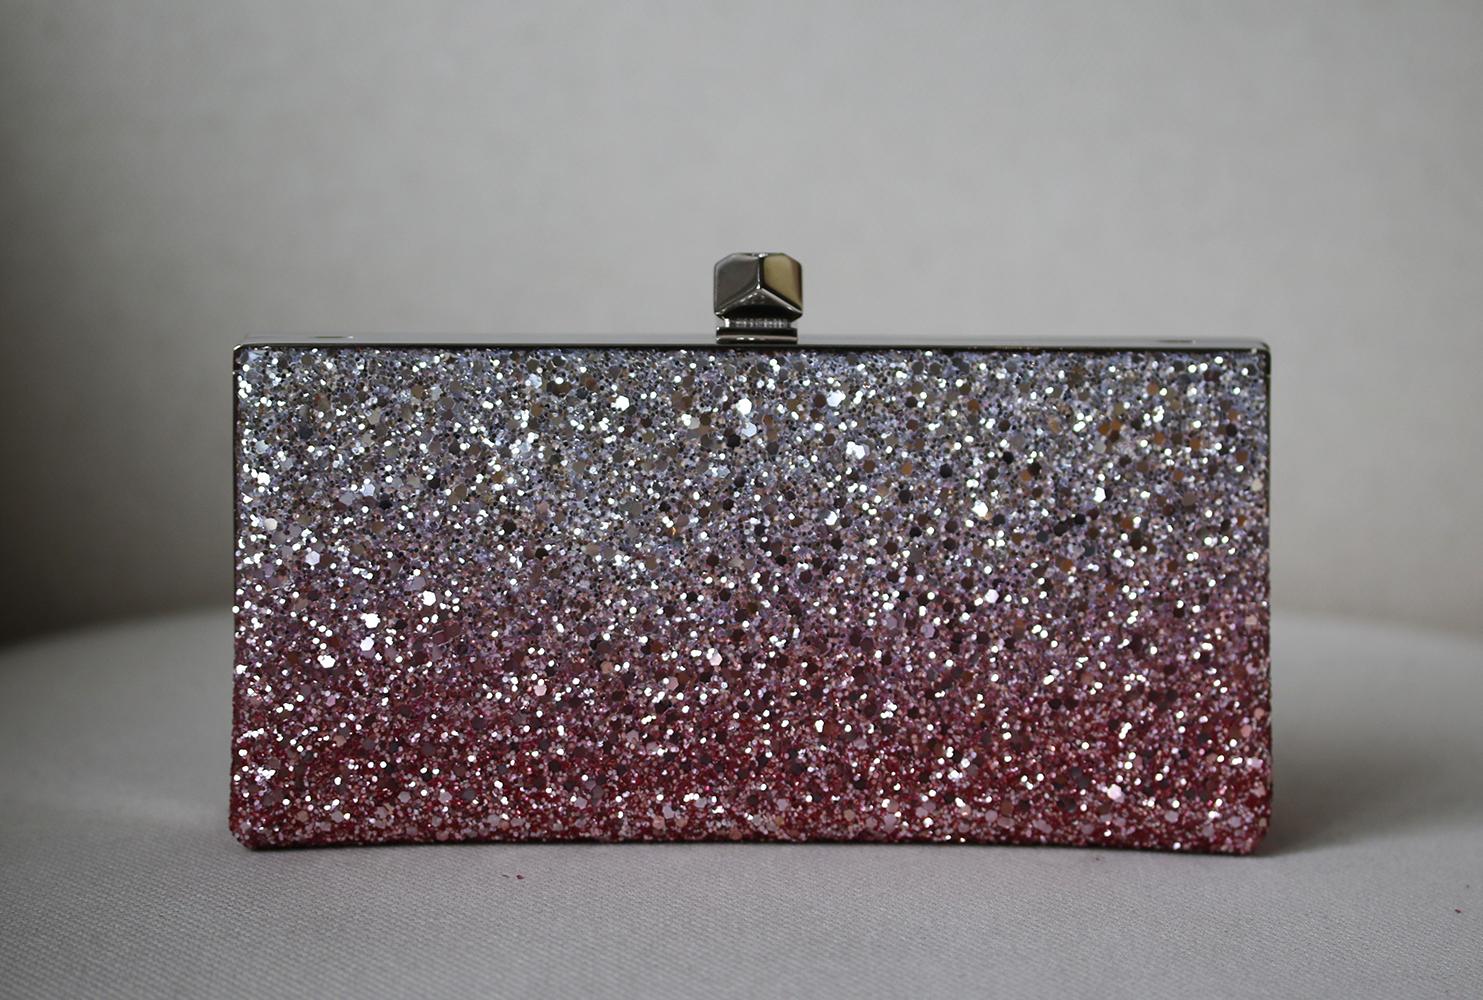 Jimmy Choo loves all things that sparkle - you can imagine the label's atelier swimming in glitter from all of its glamorous designs. This leather clutch opens with a crystal-tipped clasp to a satin-lined interior. Antique-rose and silver glittered